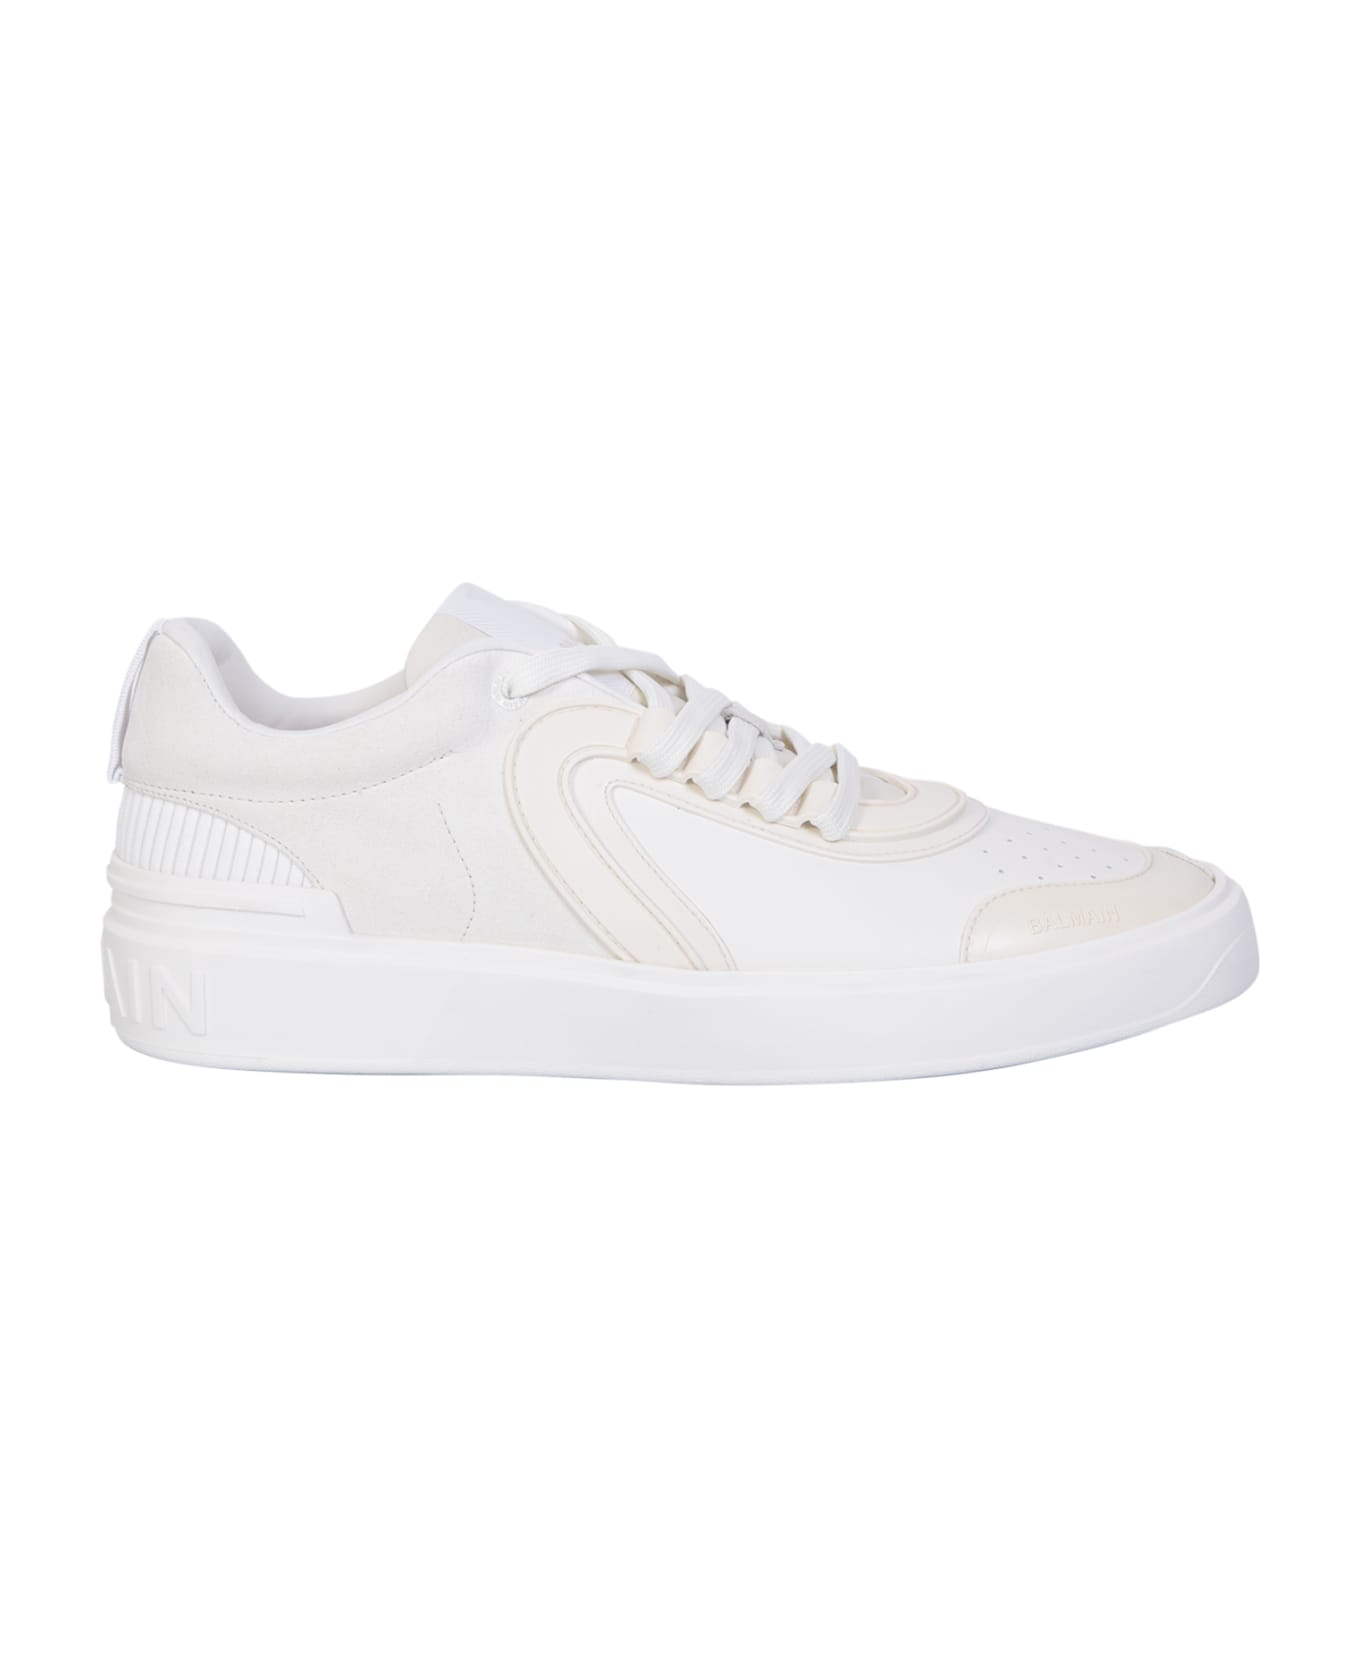 Balmain Sneakers In White Suede And Leather - white